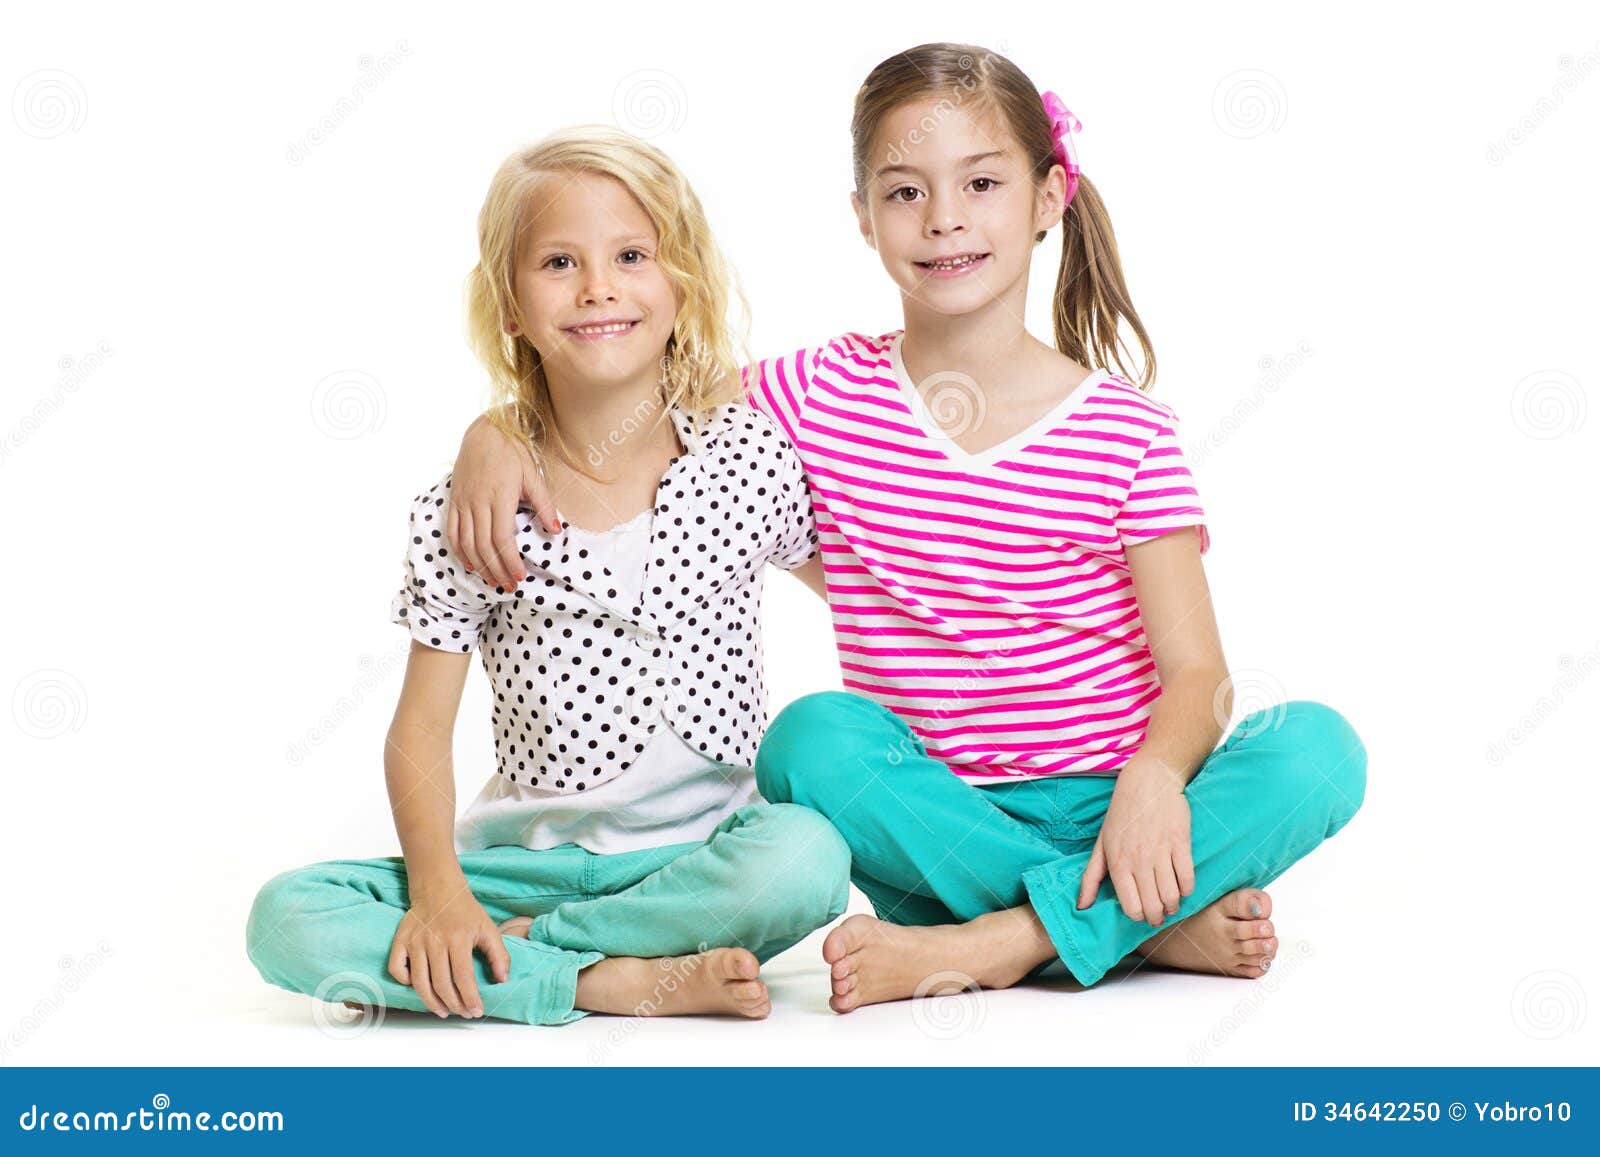 Cute Girls Best Friends stock photo. Image of background - 34642250